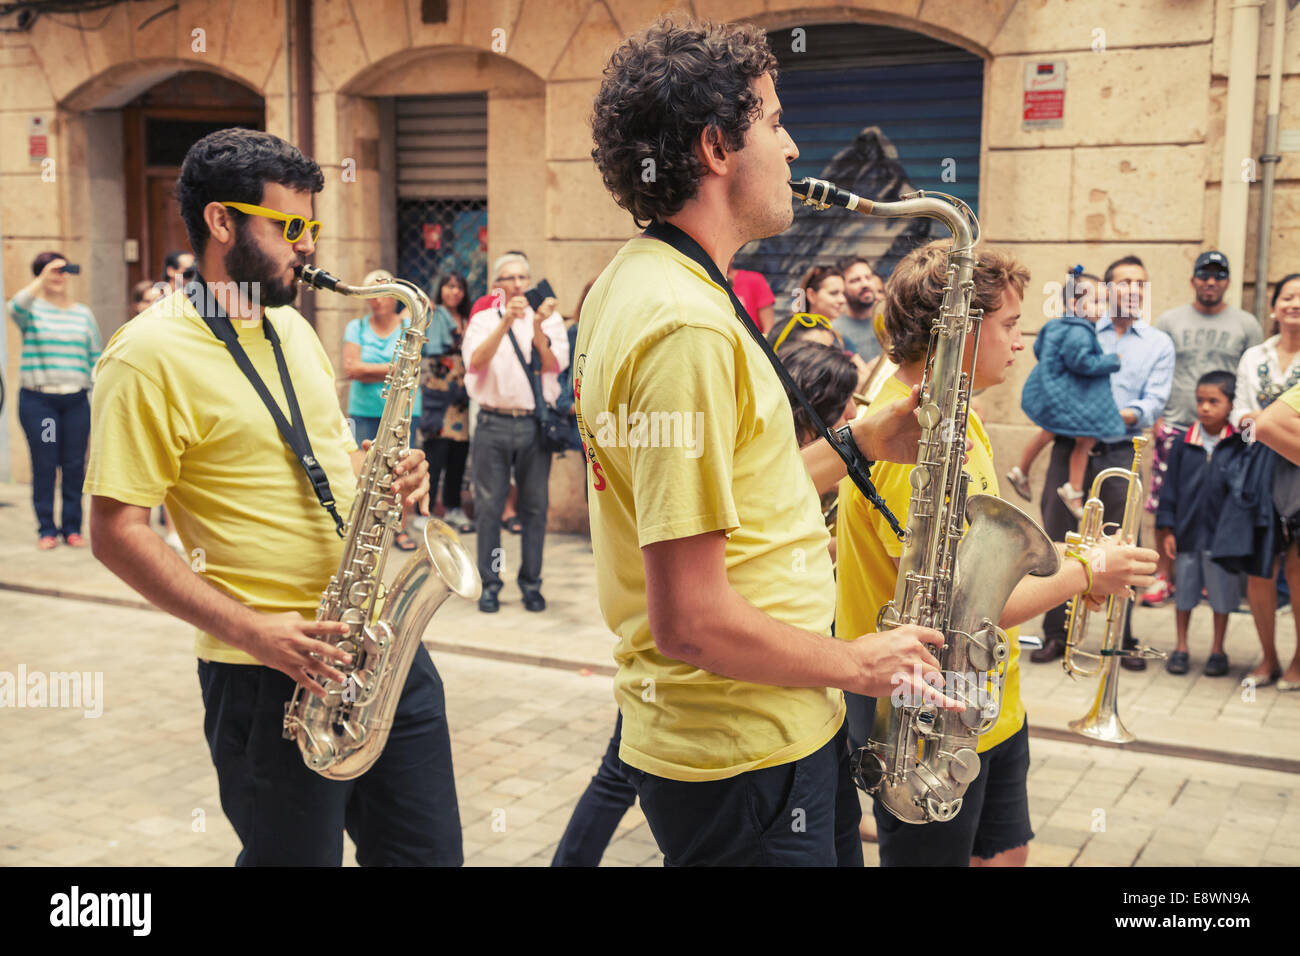 TARRAGONA, SPAIN - AUGUST 16, 2014: Young musicians with saxophones in the street of Tarragona, Catalonia, Spain Stock Photo